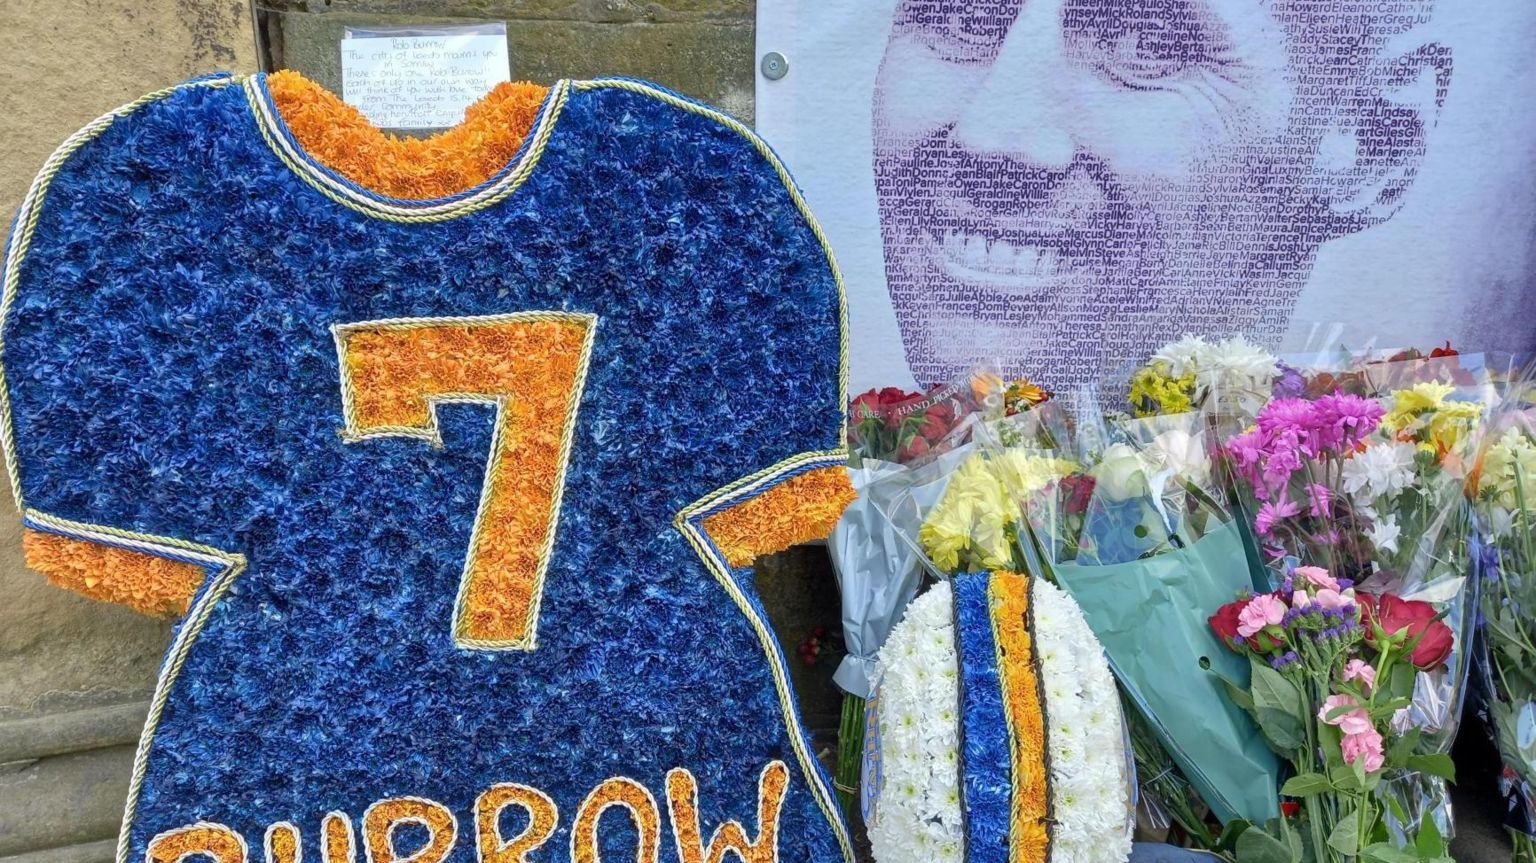 Floral tributes to Rob Burrow